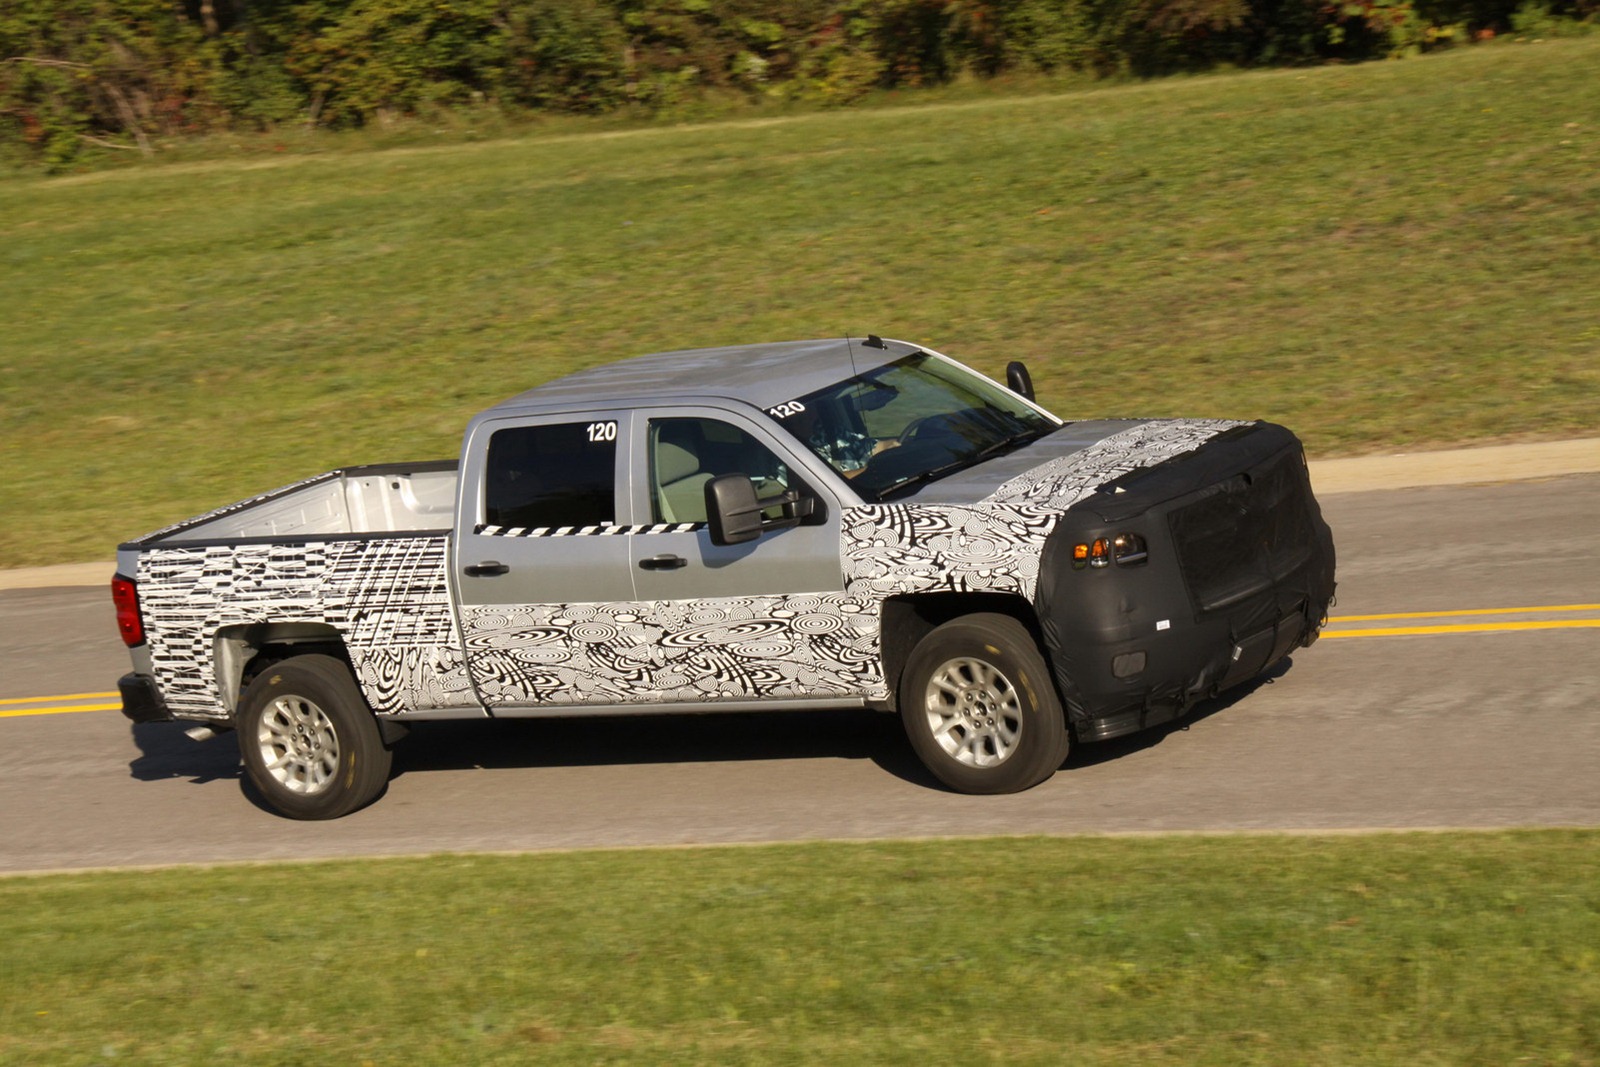 2014 Chevy Silverado Enters Final Testing, New Photo Released